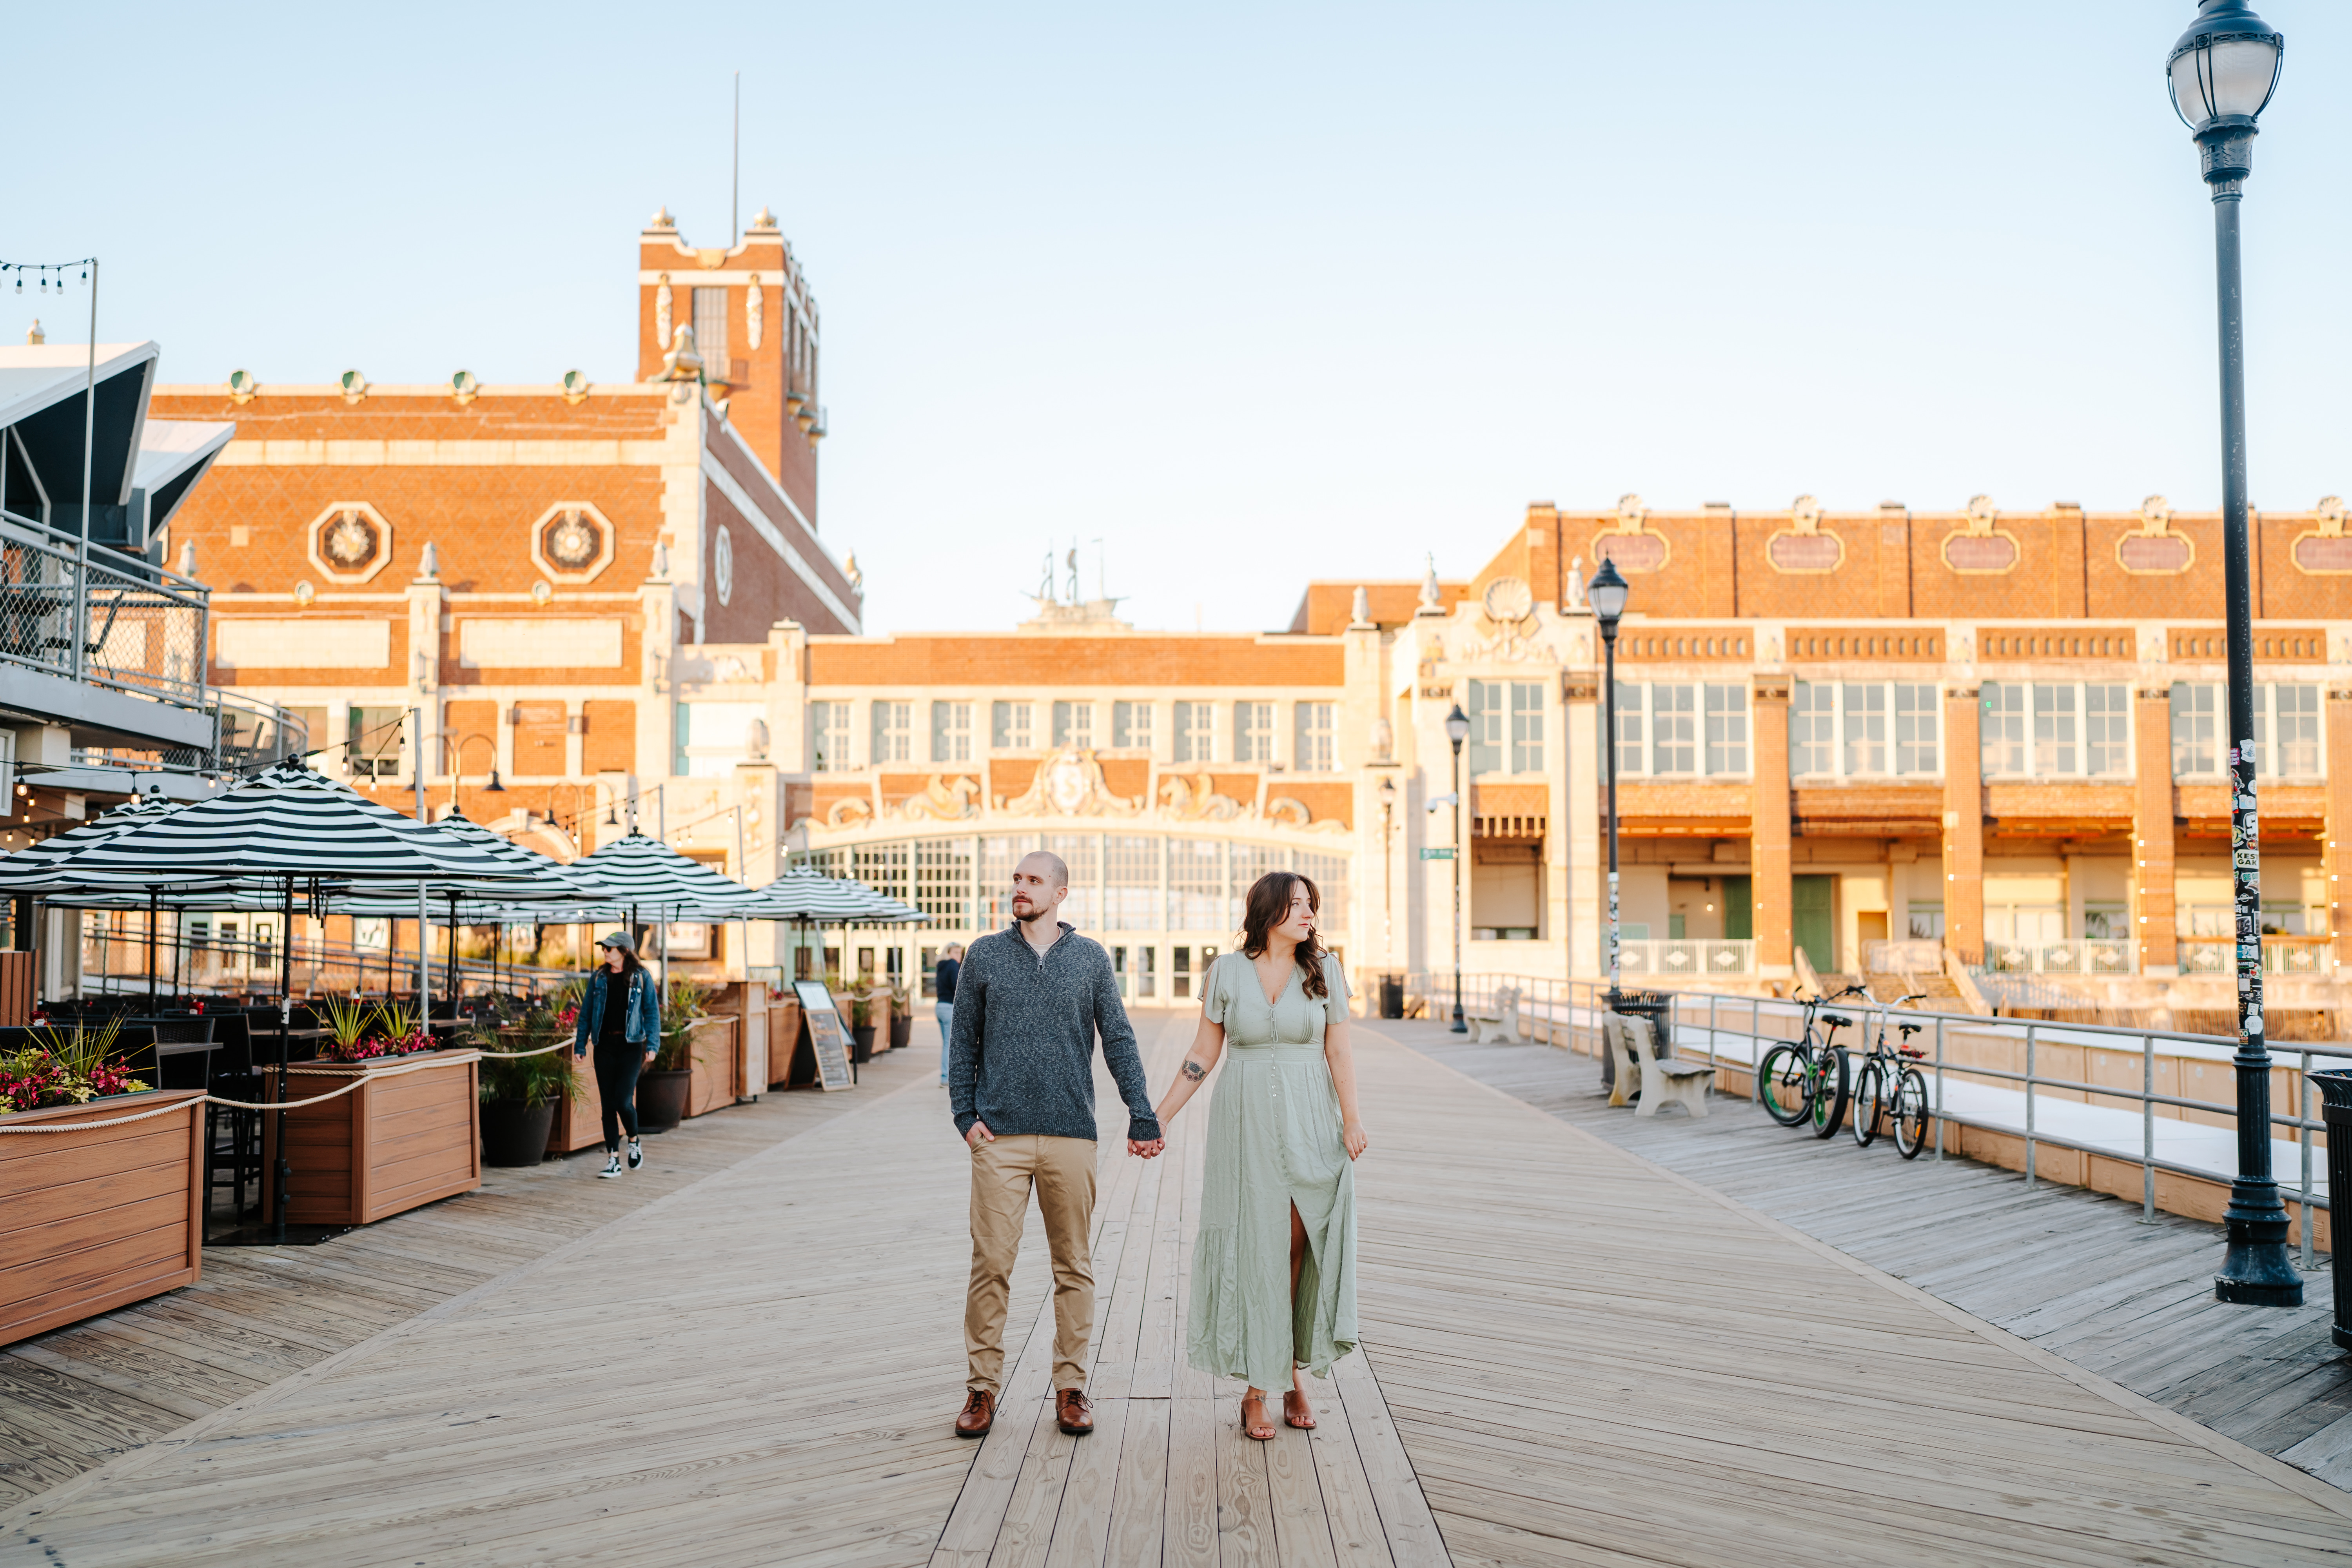 Couple embracing in a sun-kissed engagement phoCouple embracing in a sun-kissed engagement photo on Asbury Park Boardwalk, captured by Maryland Wedding Photographer, showcasing candid love and joyful momentsto on Asbury Park Boardwalk, captured by Maryland Wedding Photographer, showcasing candid love and joyful moments